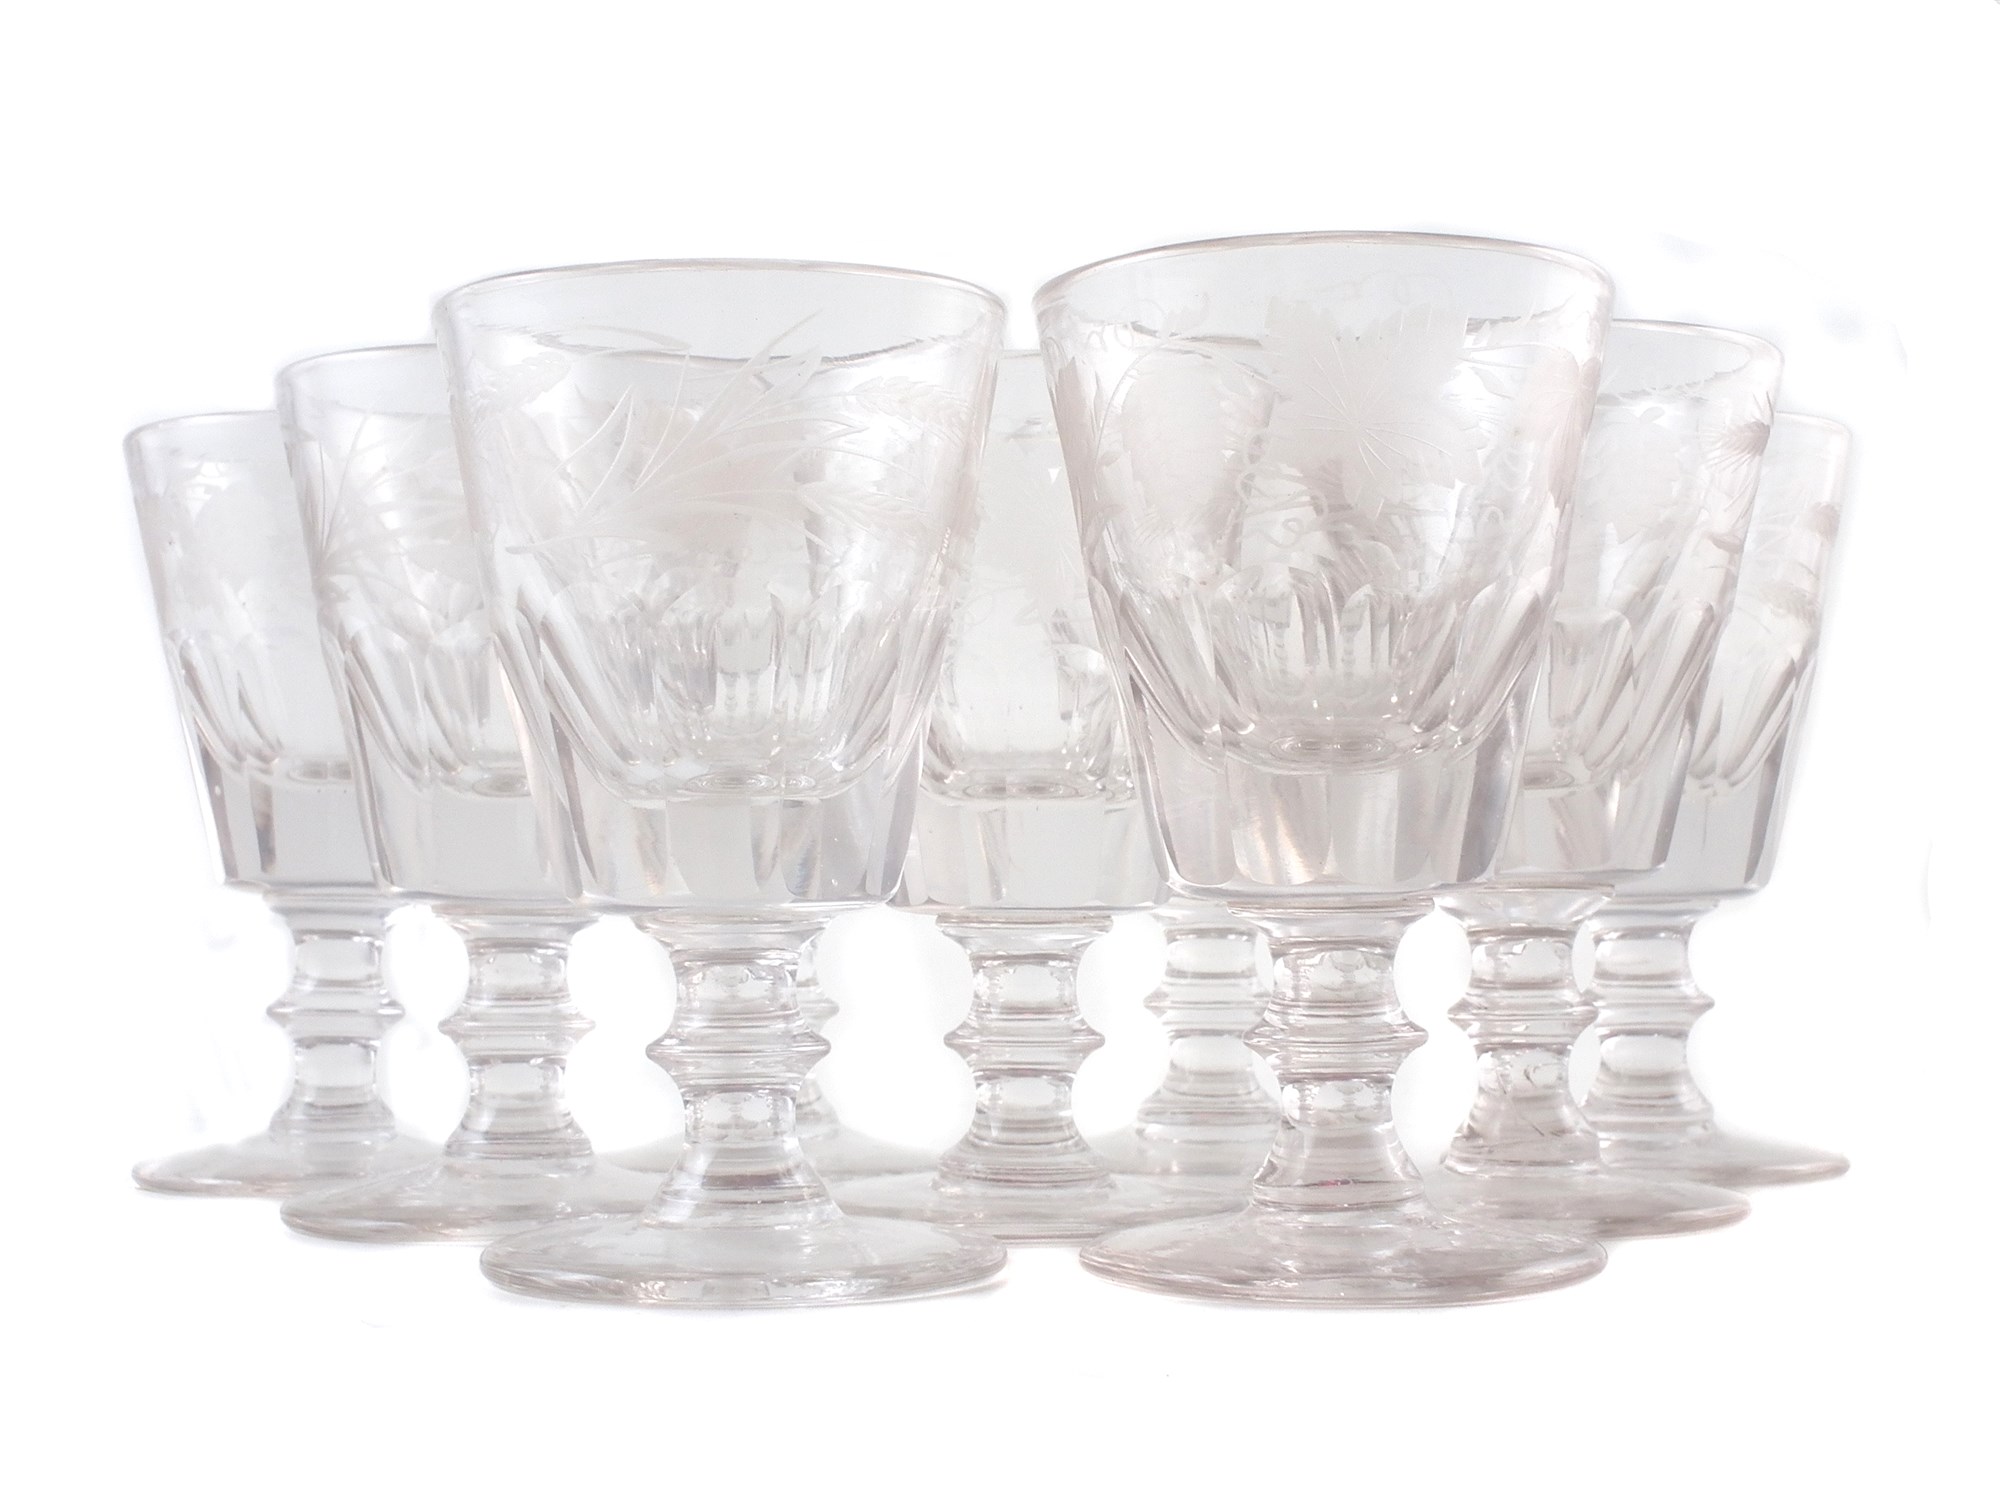 Nine mid 19th century ale glasses , the bowls engraved with hops, leaves and barley, 12.5cm high For